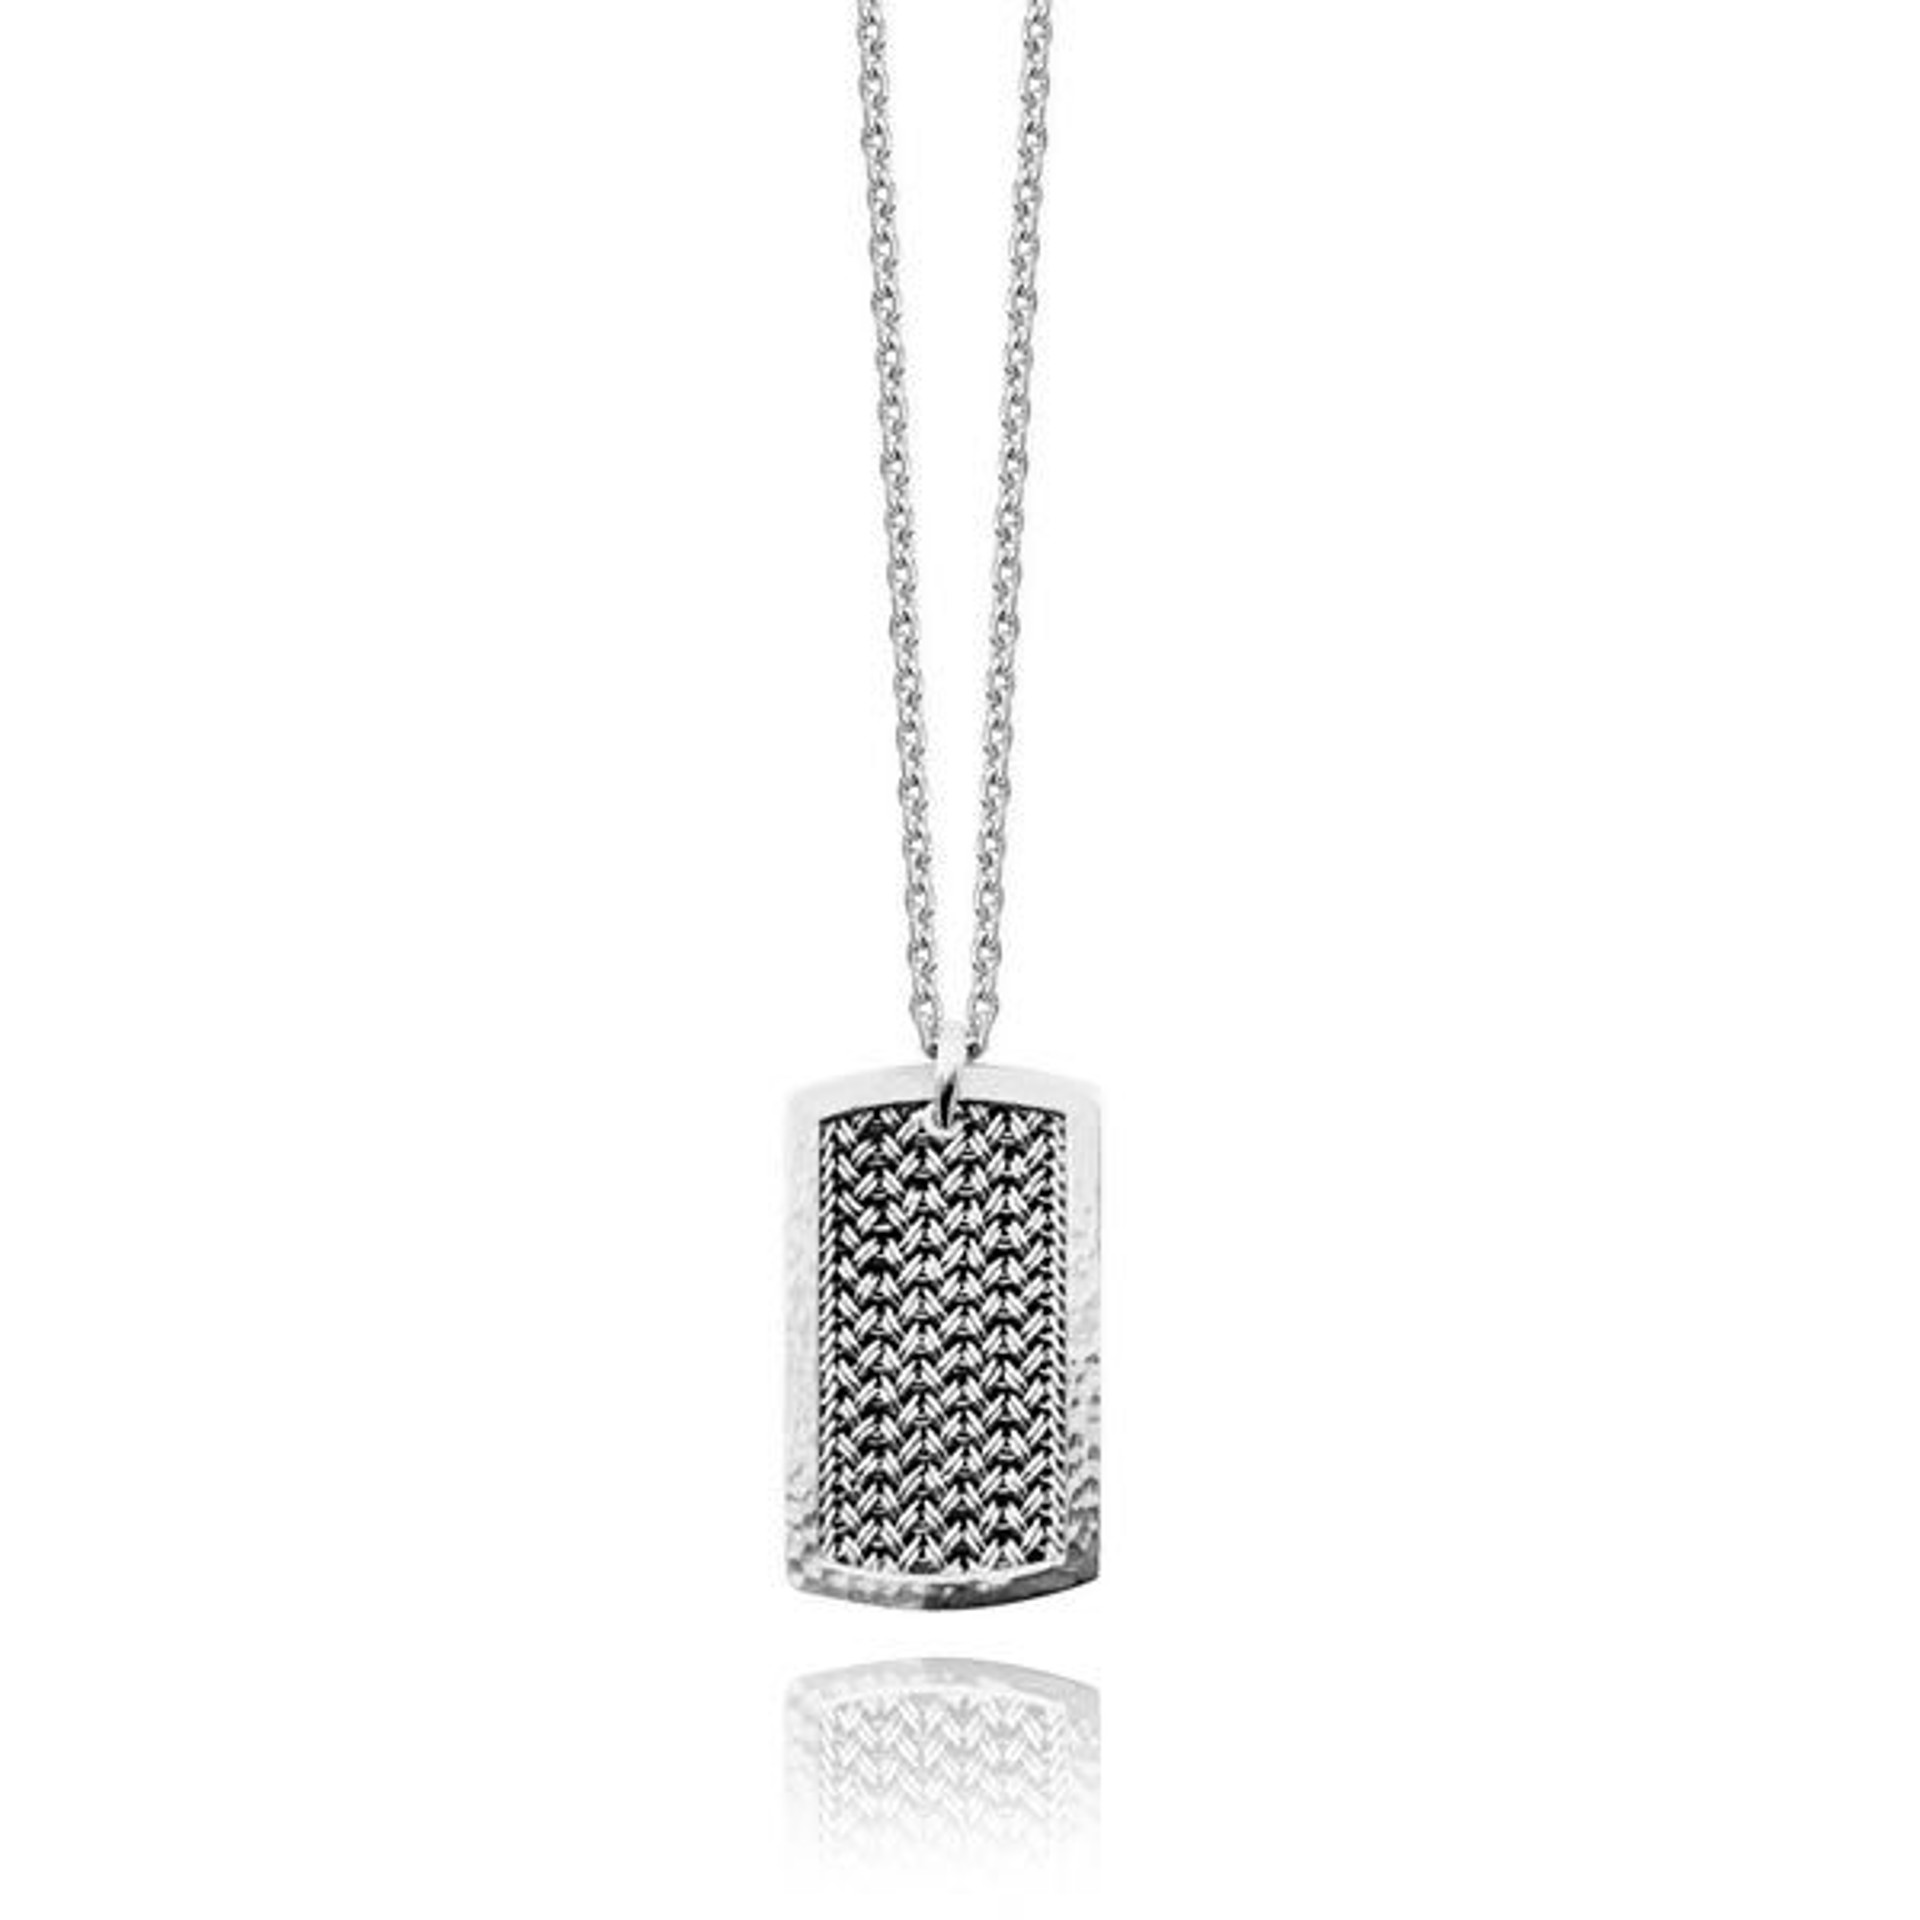 7022 Men's Silver Necklace by Lois Hill